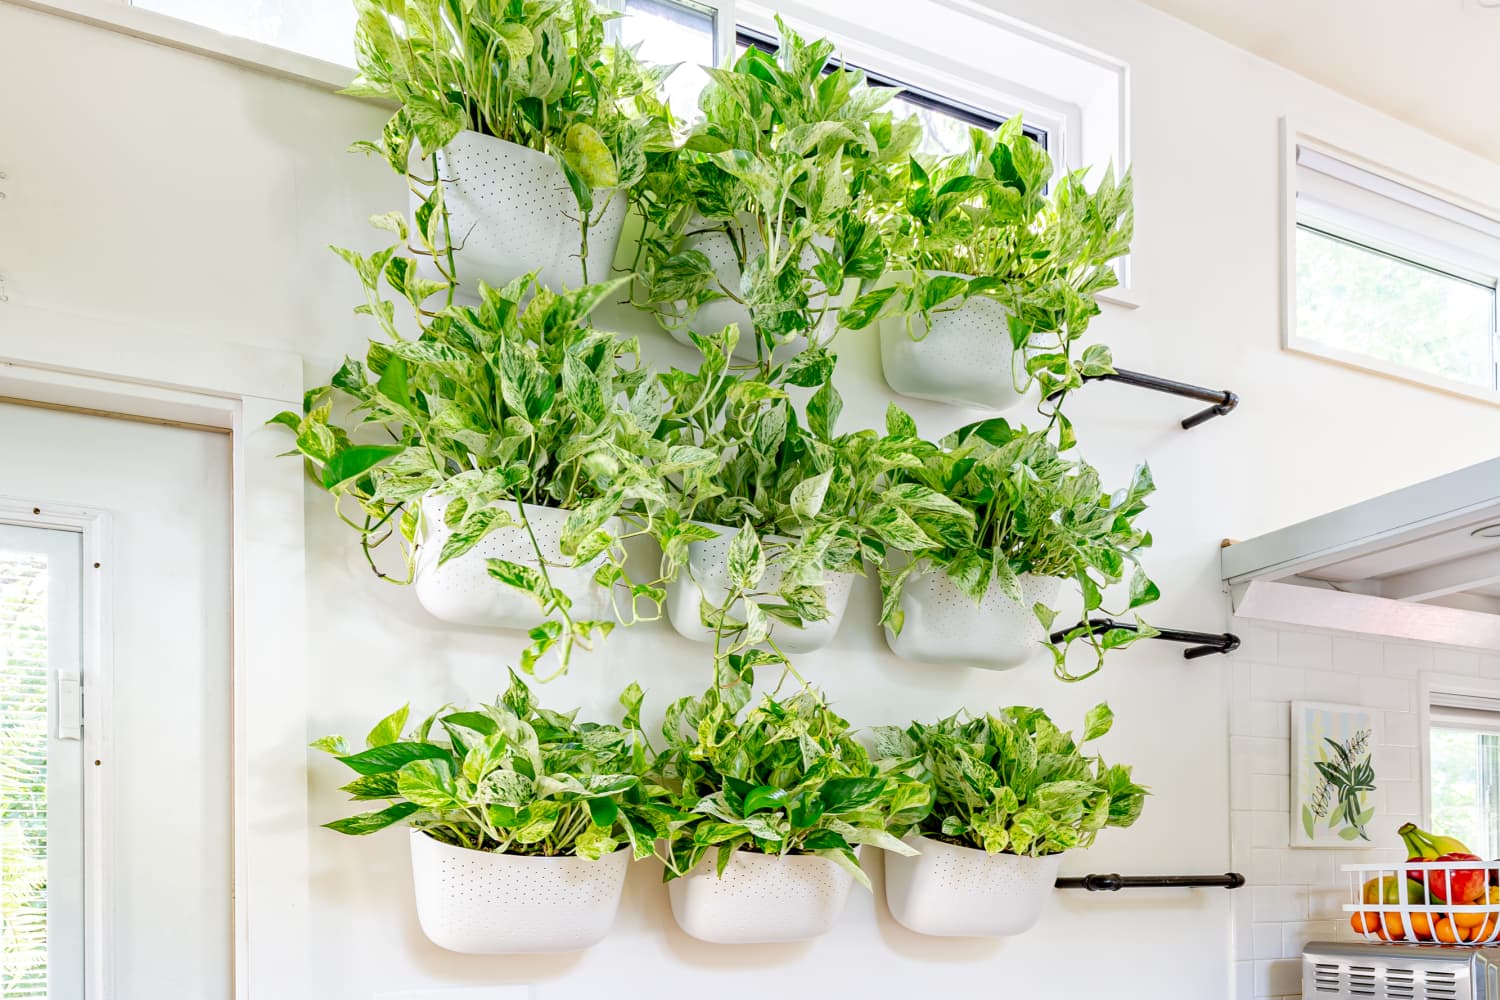 How to Display Houseplants: 100 of Our Favorite Plant-Display Ideas